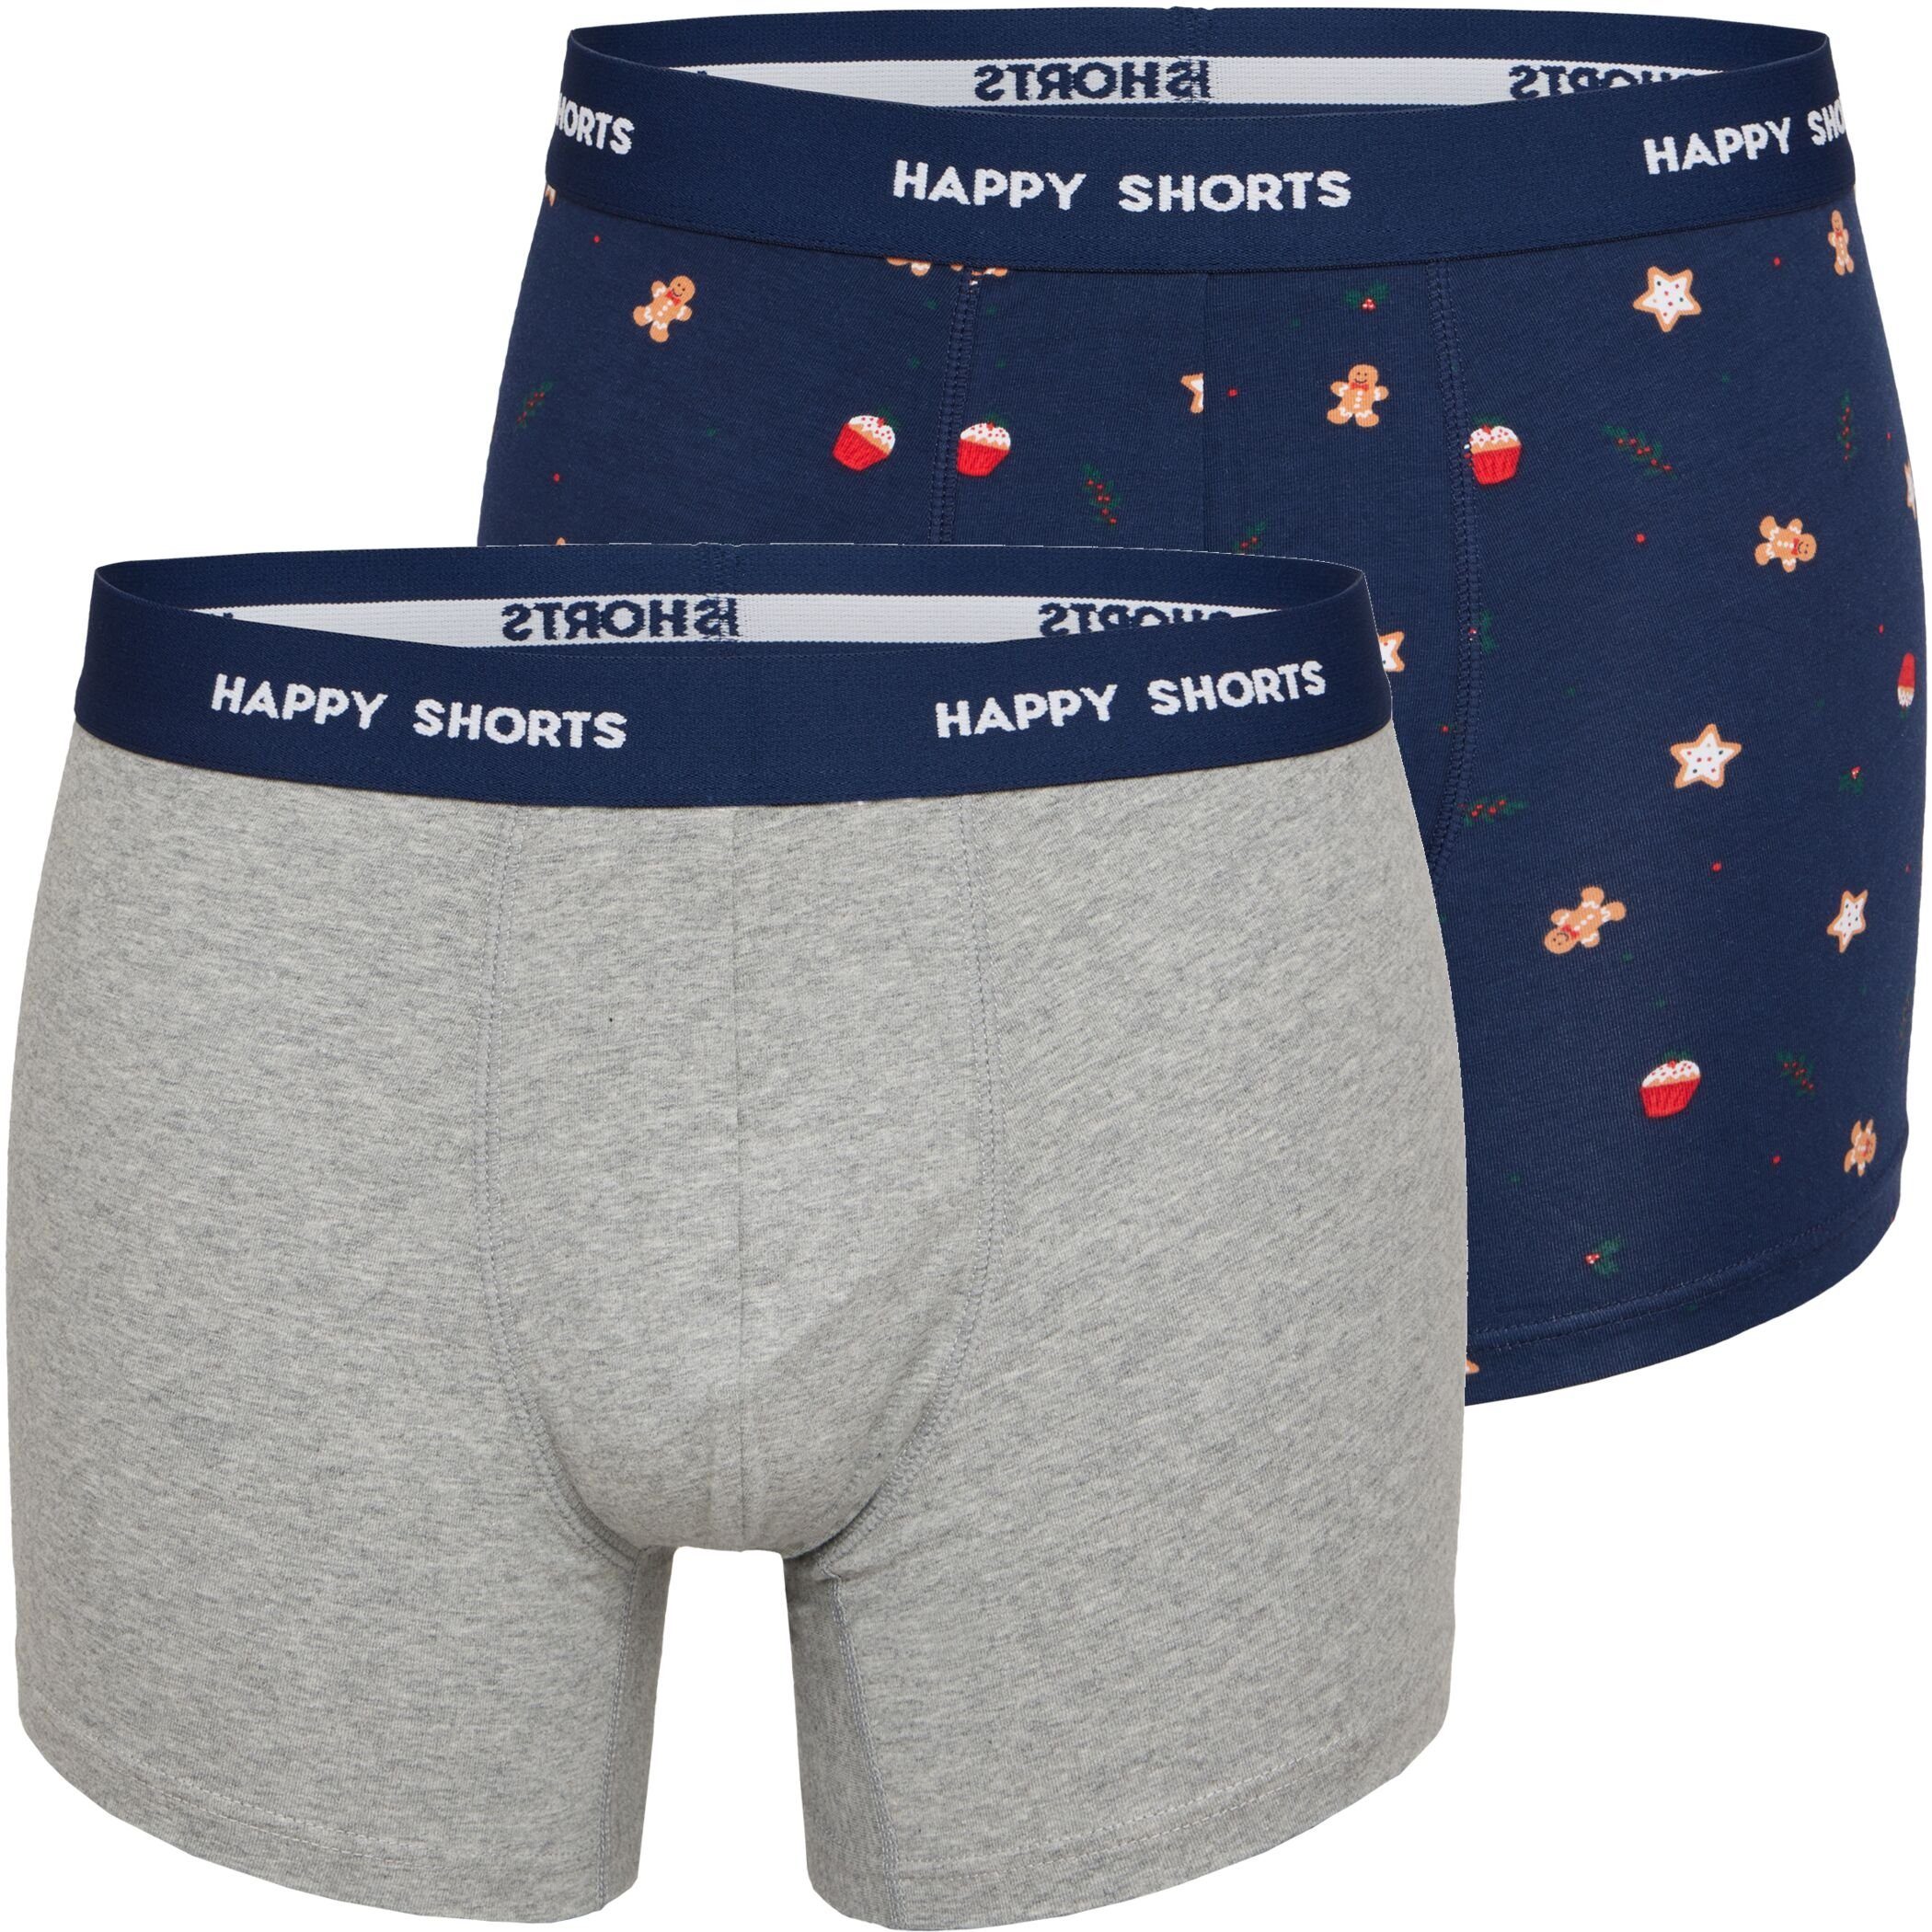 HAPPY SHORTS Trunk 2er Boxershorts (1-St) Cookies Jersey Pant Weihnachten SHORTS HAPPY Pack